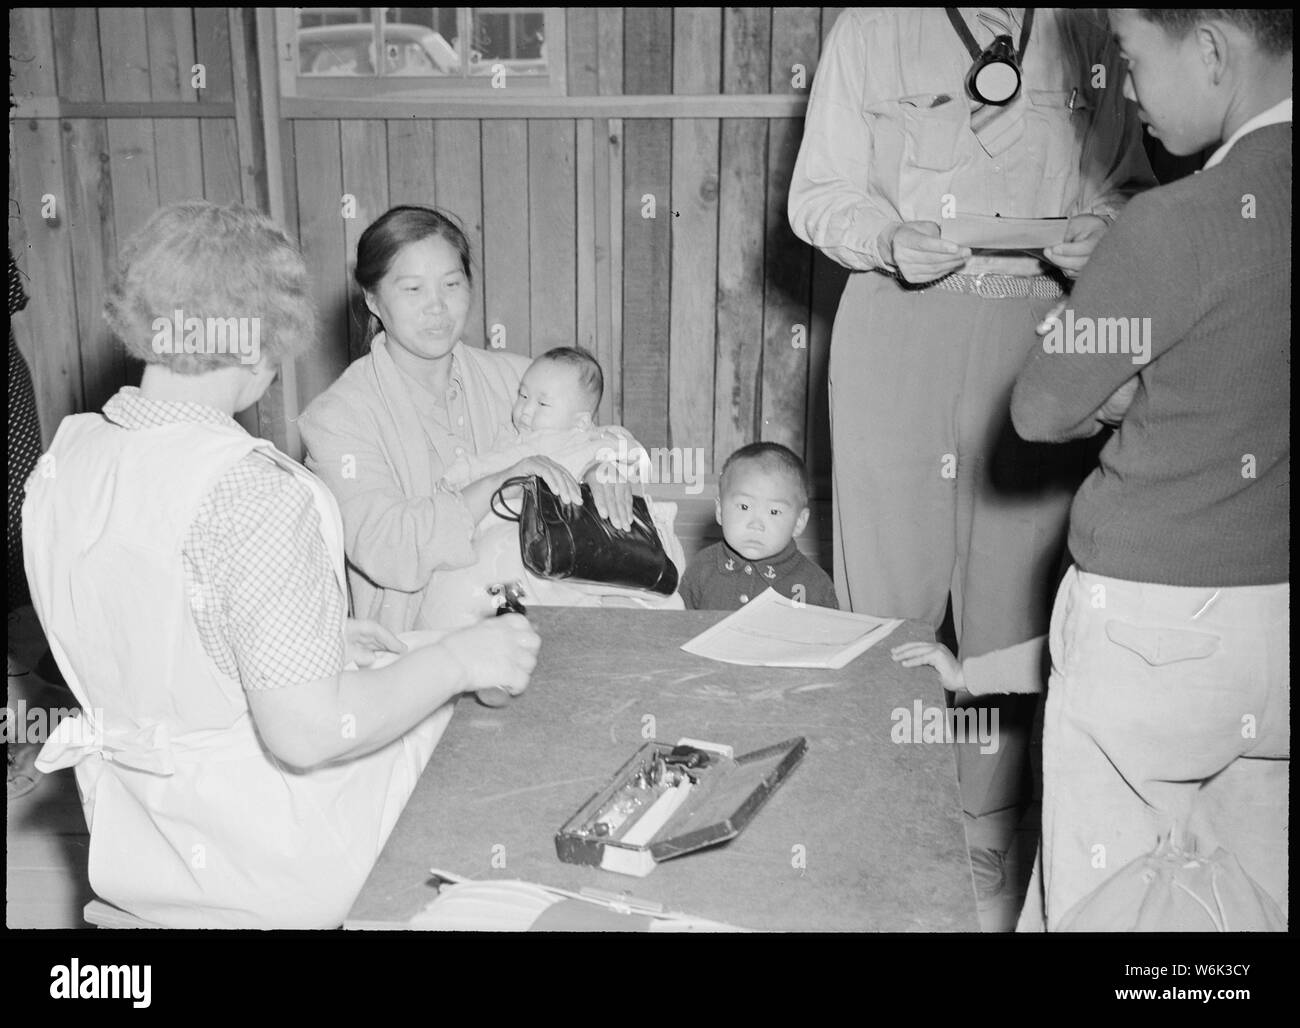 Poston, Arizona. Evacuees of Japanese ancestry are given a preliminary medical examination upon arr . . .; Scope and content:  The full caption for this photograph reads: Poston, Arizona. Evacuees of Japanese ancestry are given a preliminary medical examination upon arrival at this War Relocation Center. Stock Photo